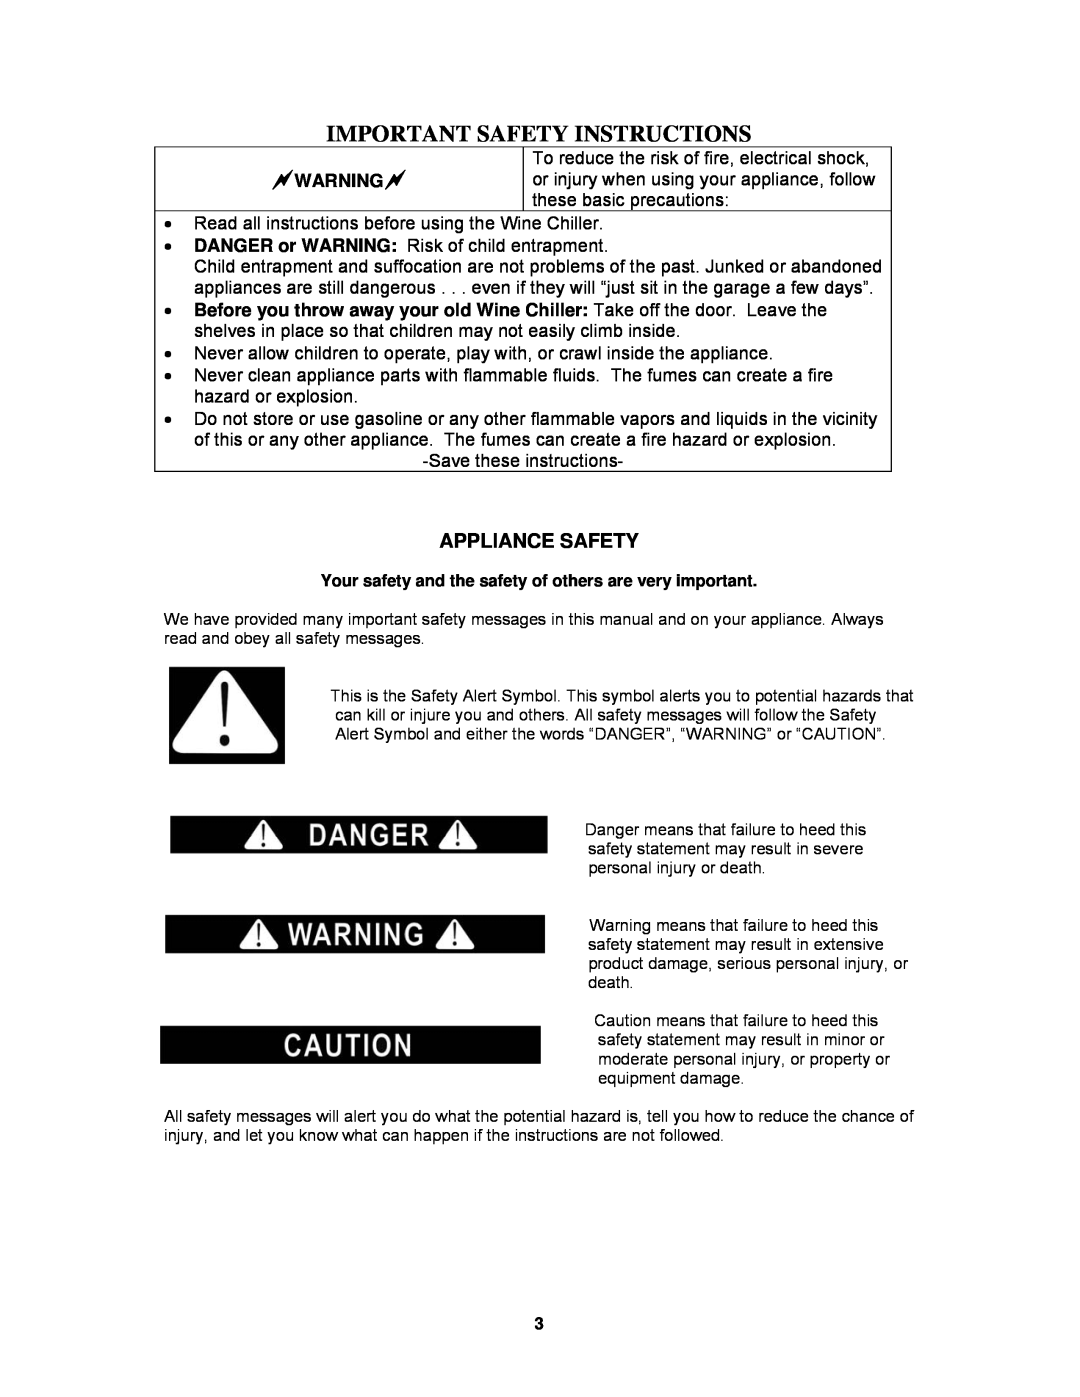 Avanti WC55SSR instruction manual Appliance Safety, To reduce the risk of fire, electrical shock, Save these instructions 